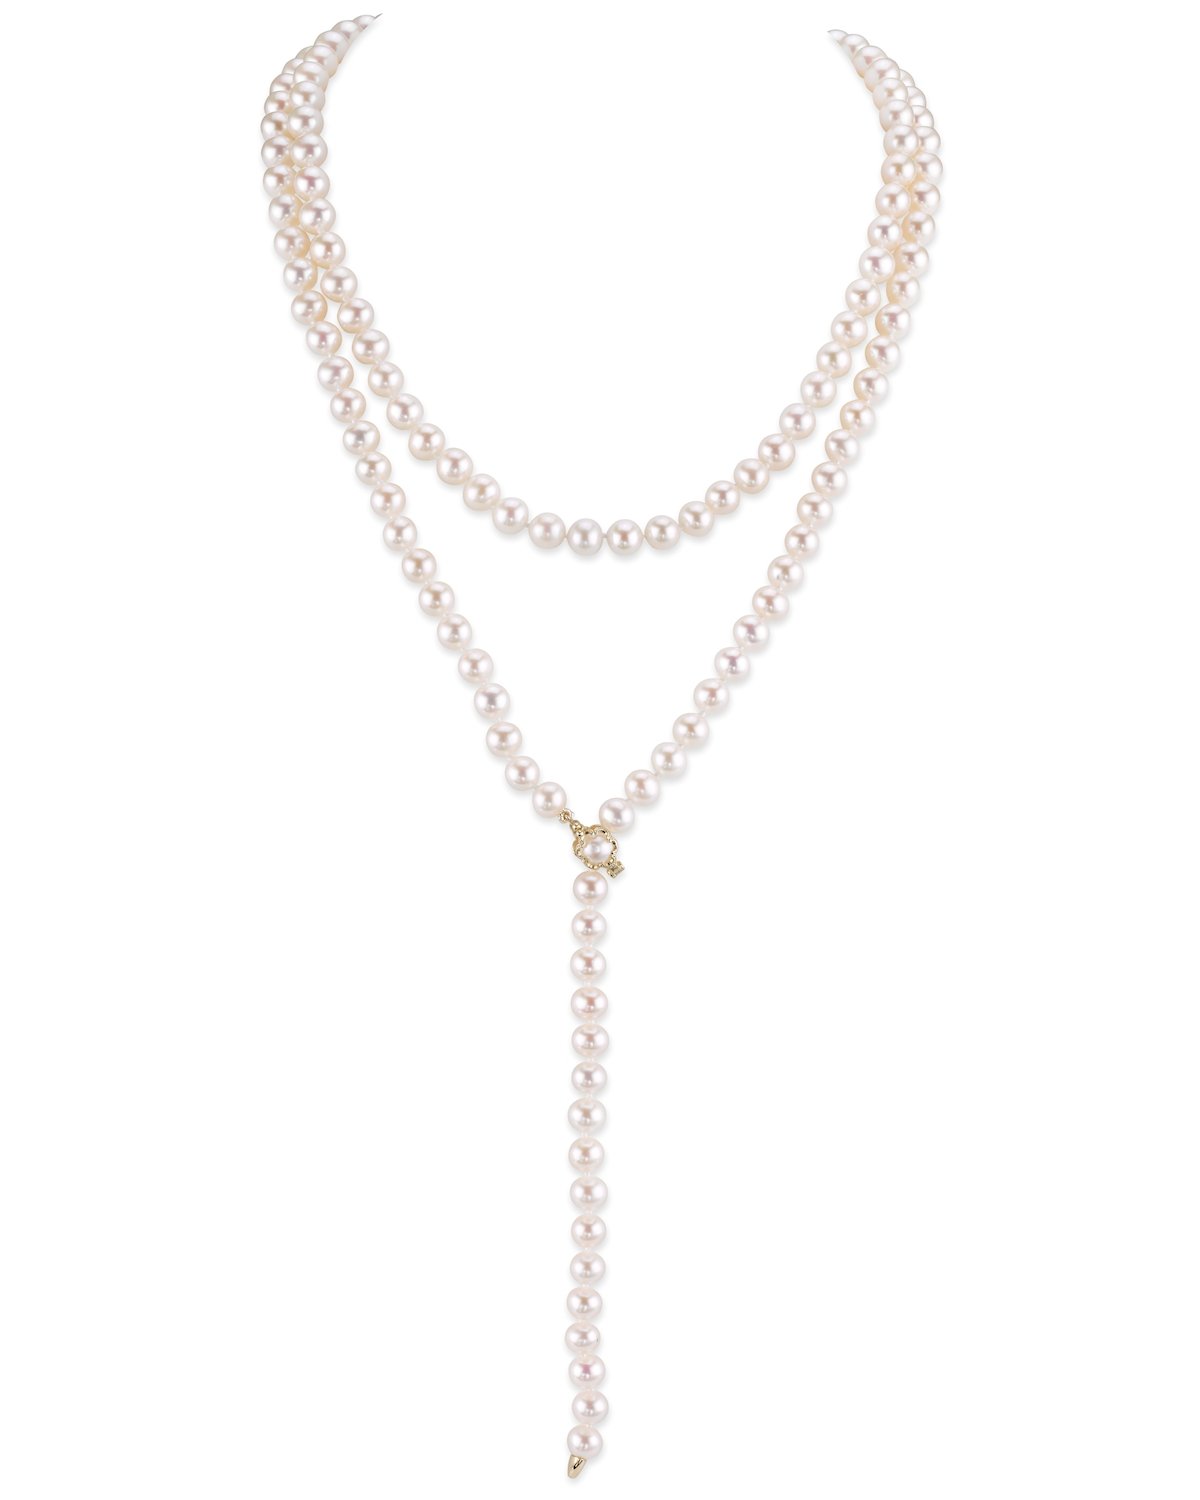 Japanese Akoya White Pearl Adjustable Y-Shape 51 Inch Rope Length Necklace - AAA Quality - Third Image